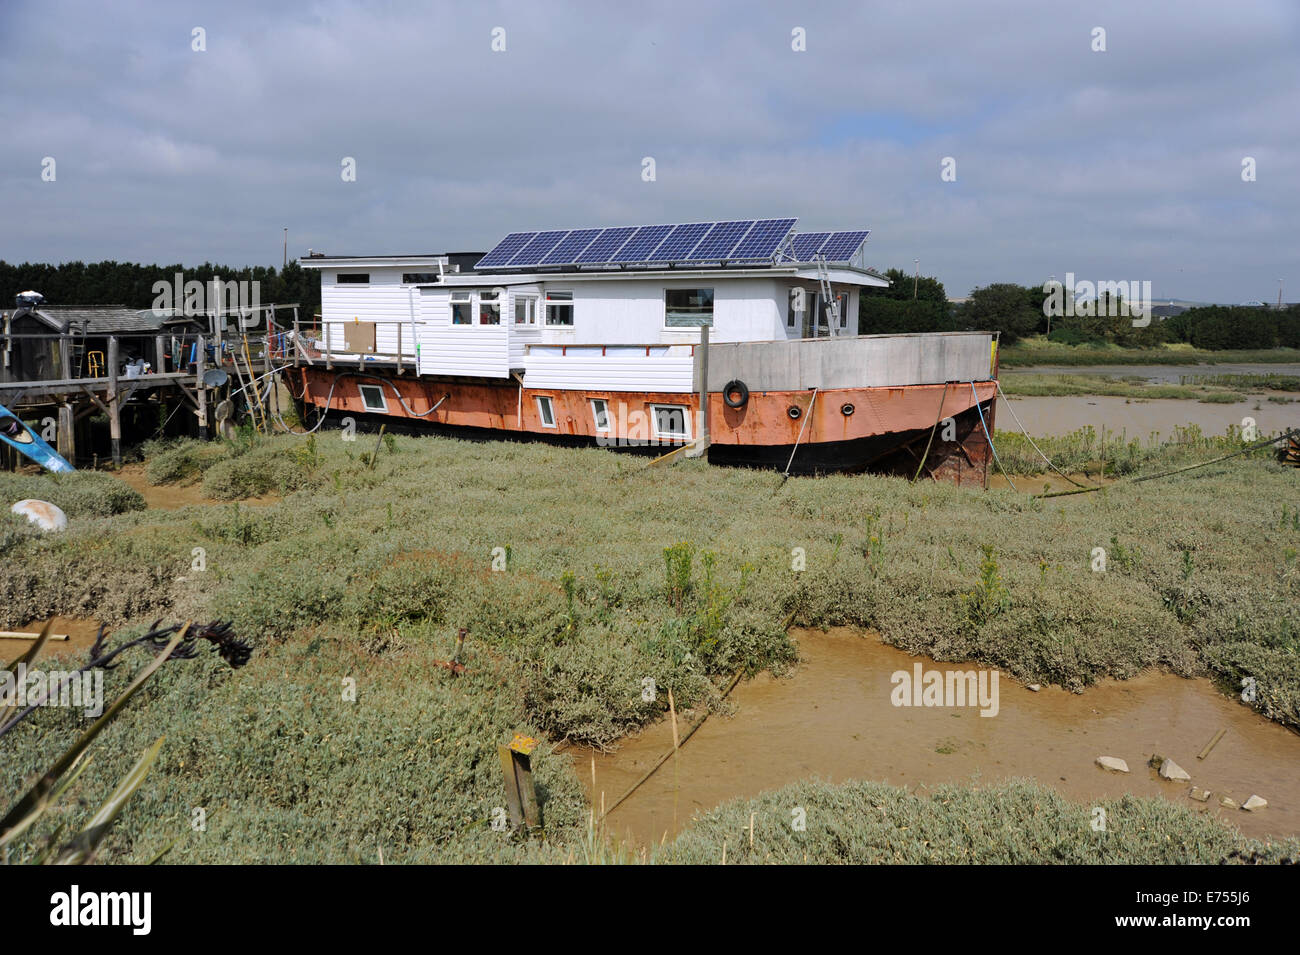 Shoreham West Sussex UK - A houseboat with solar panels for energy on the River Adur Shoreham Beach Stock Photo